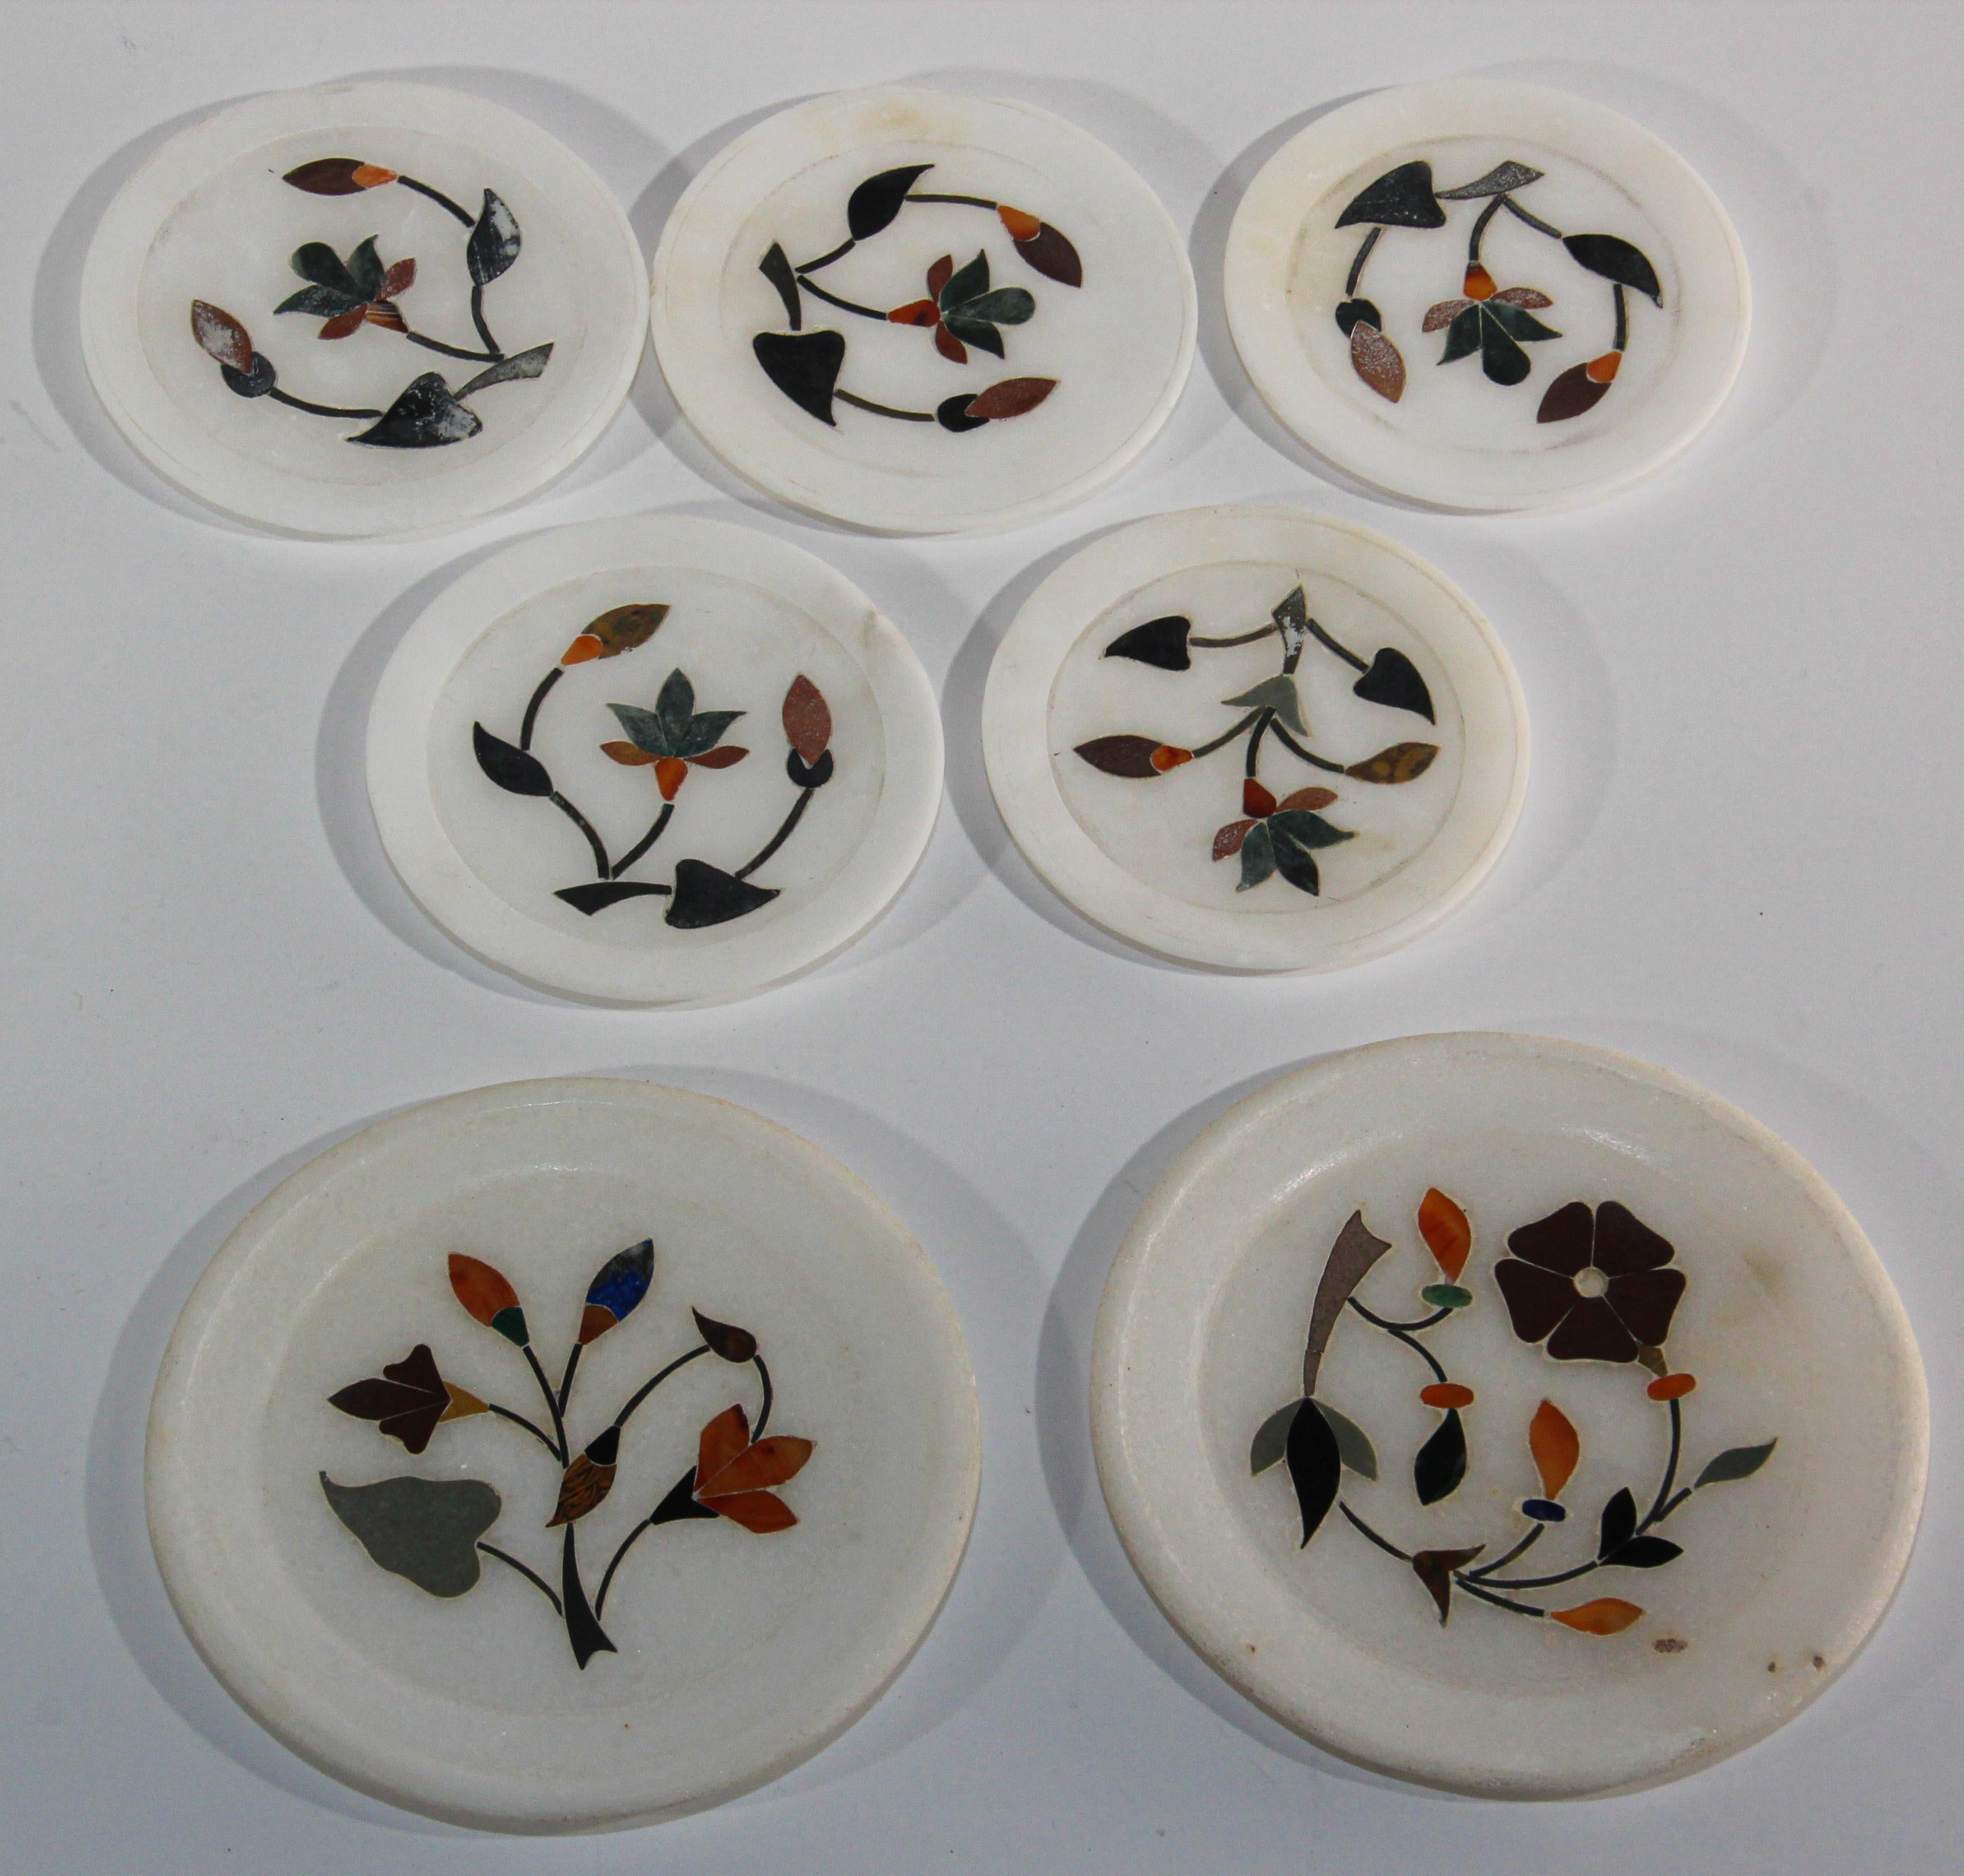 Vintage Rajasthani Pietra Dura White Stone Inlay Taj Mahal India Style coaster plates.
Rajasthani inlaid stone marble decorative set of 7 small round plates in Pietra Dura work.
Beautiful handcrafted coasters in marble inlaid with semi precious